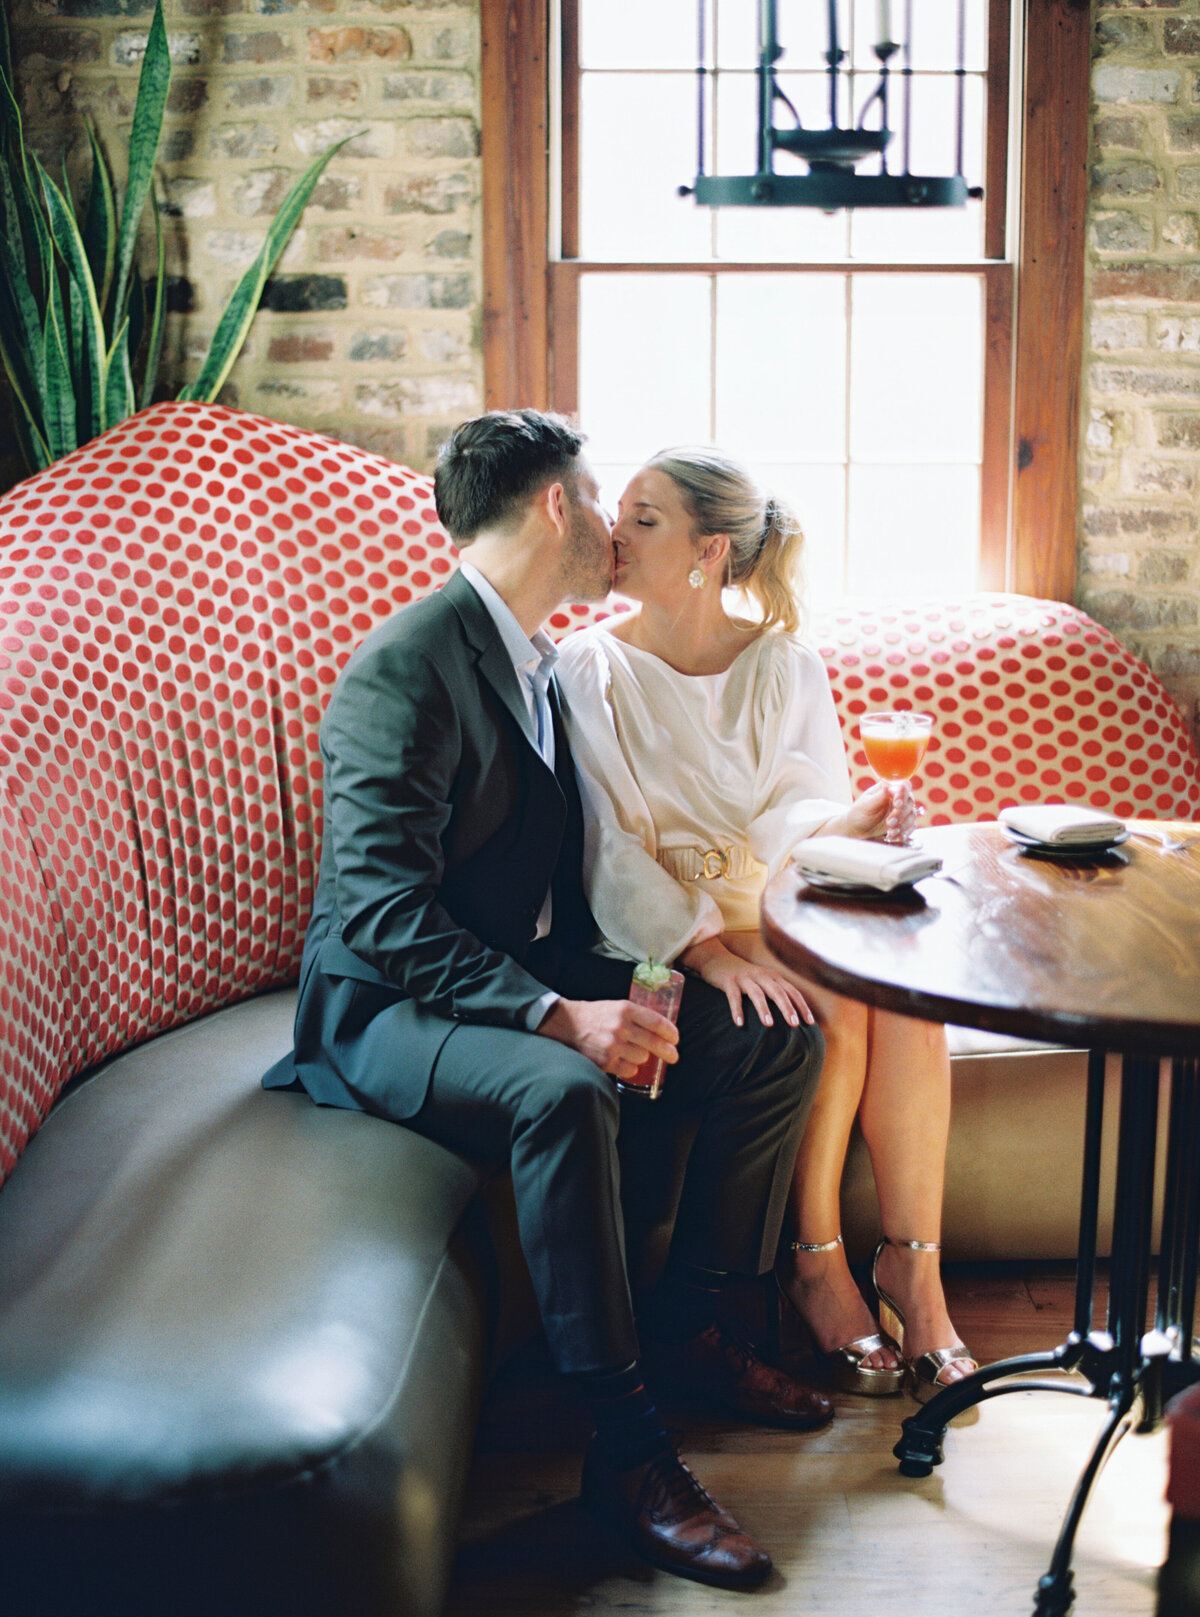 Private engagement photos upstairs at the bar at Husk. Film photographer based in Charleston, SC.